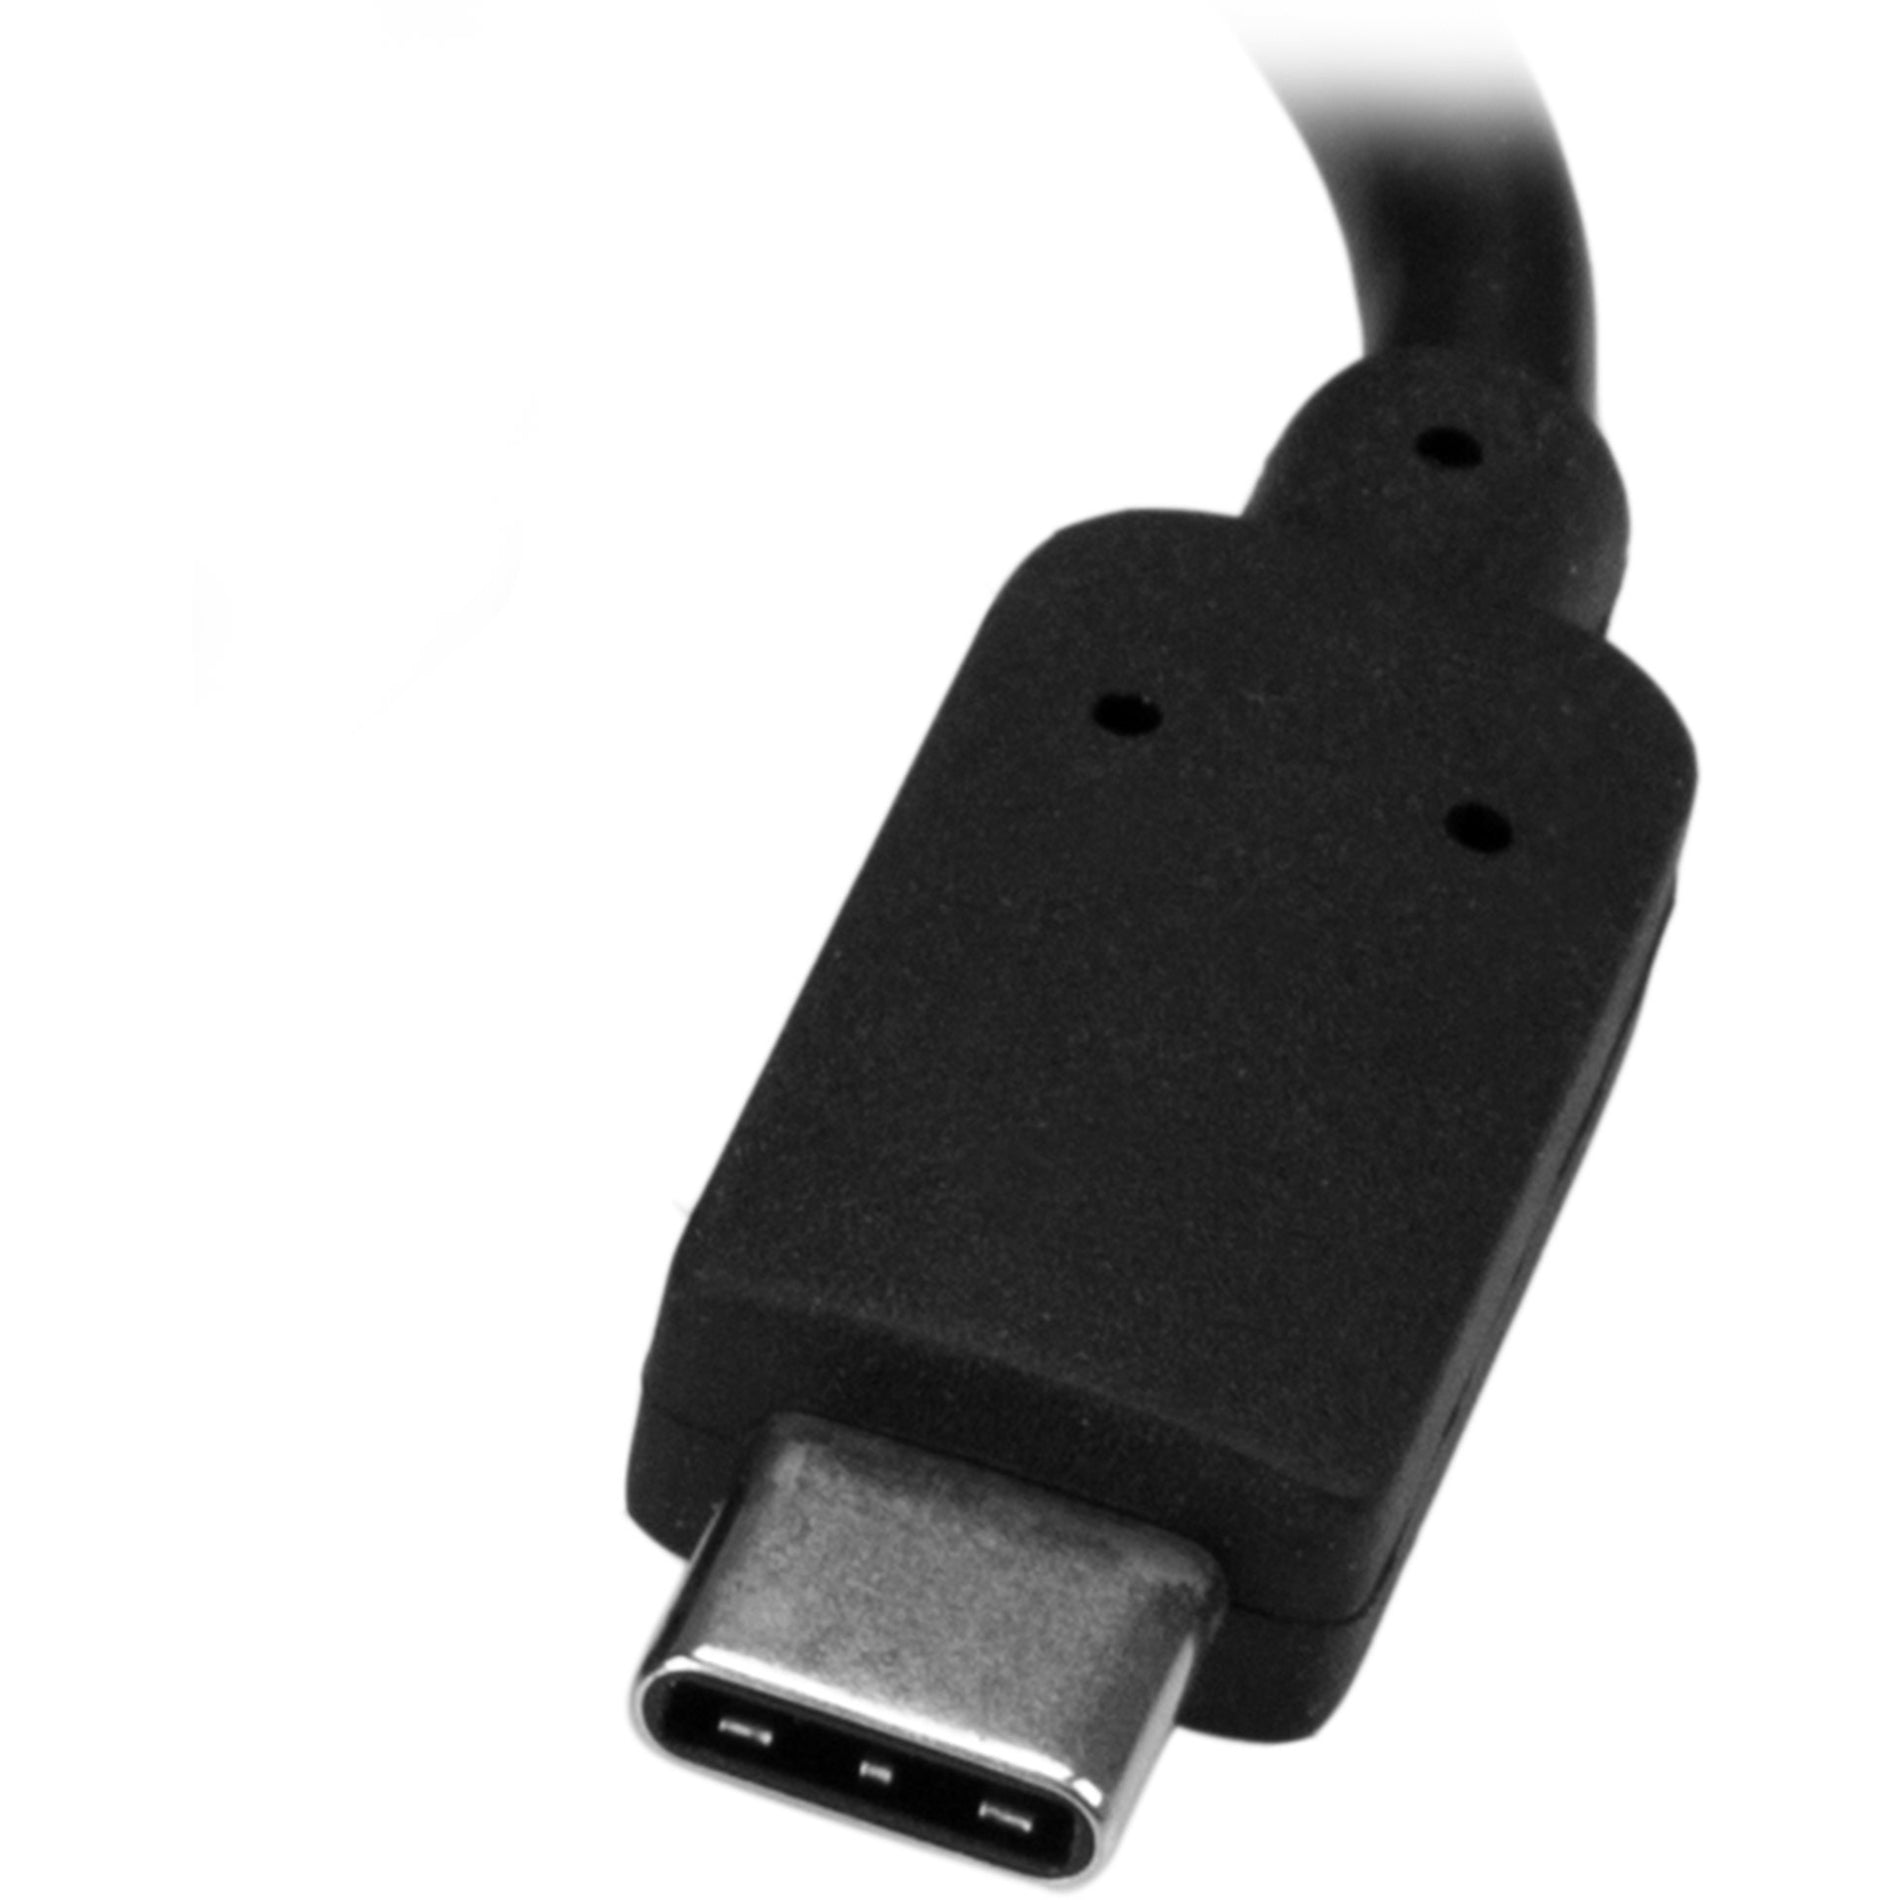 StarTech.com US1GC30PD USB-C to Ethernet Adapter with PD Charging, Gigabit Ethernet Network Adapter